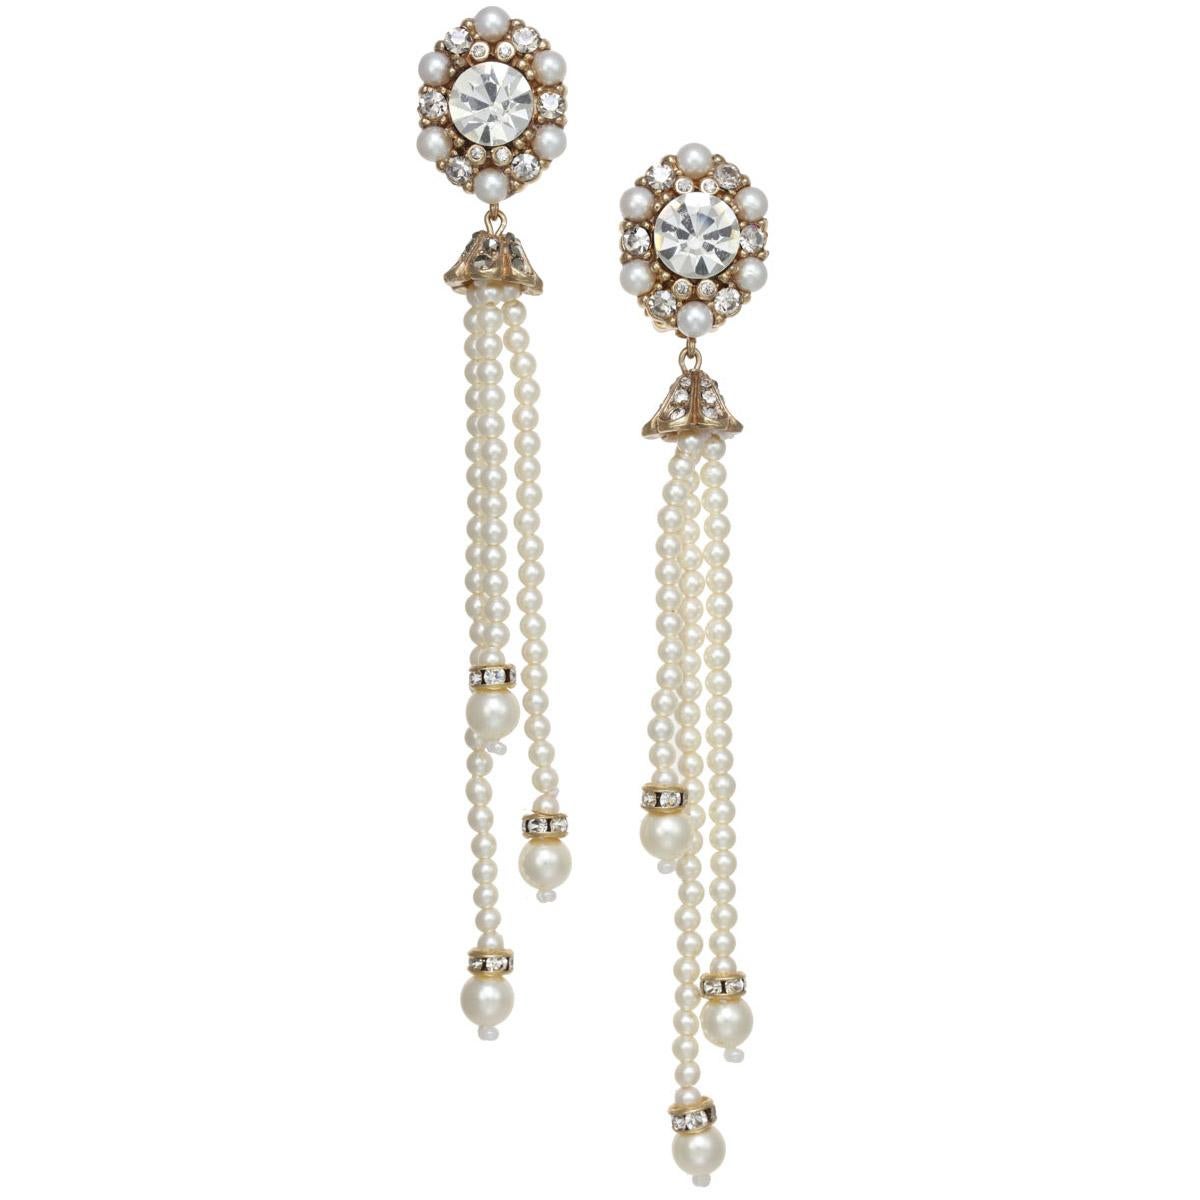 Two of our favorite things! Pearls and Tassels, A CINER favorite, the Pearl Tassel earrings offer the perfect amount of chic sophistication.

PLEASE NOTE: The pieces available are not vintage and are not reproductions.
CINER uses original models to